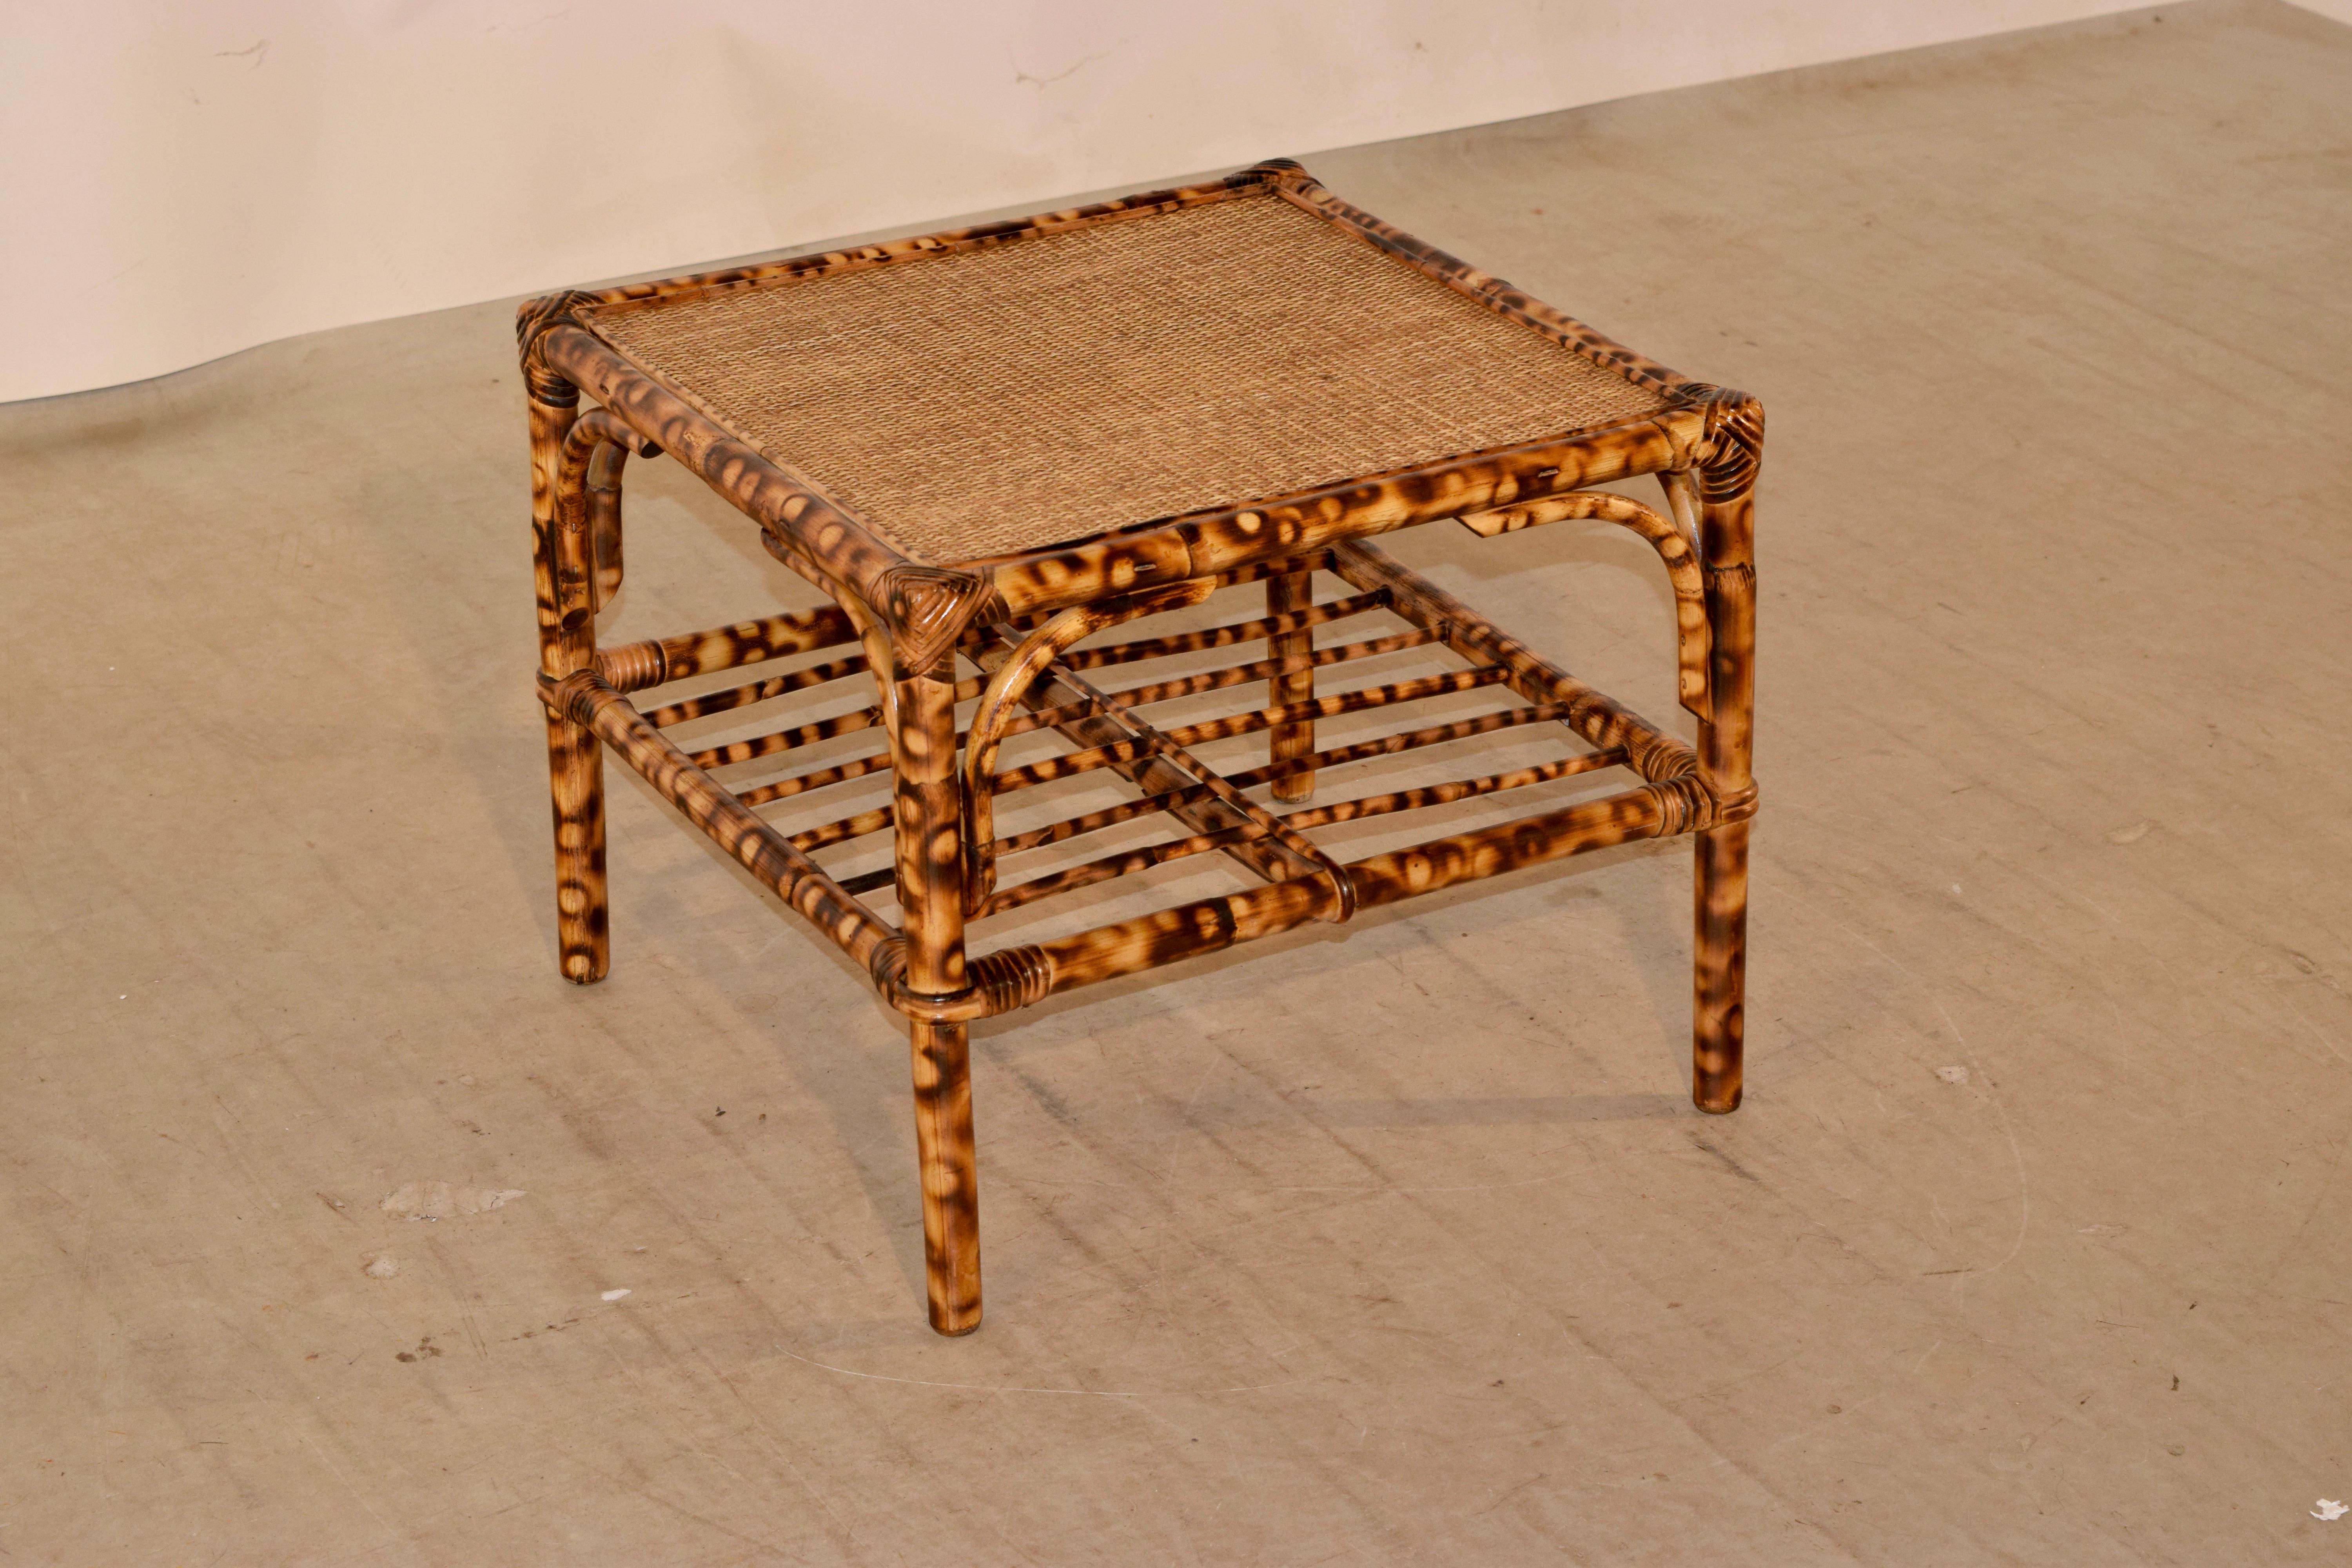 Tortoise bamboo coffee table from France with a woven rush top and slatted lower shelf. Great size and coloring.